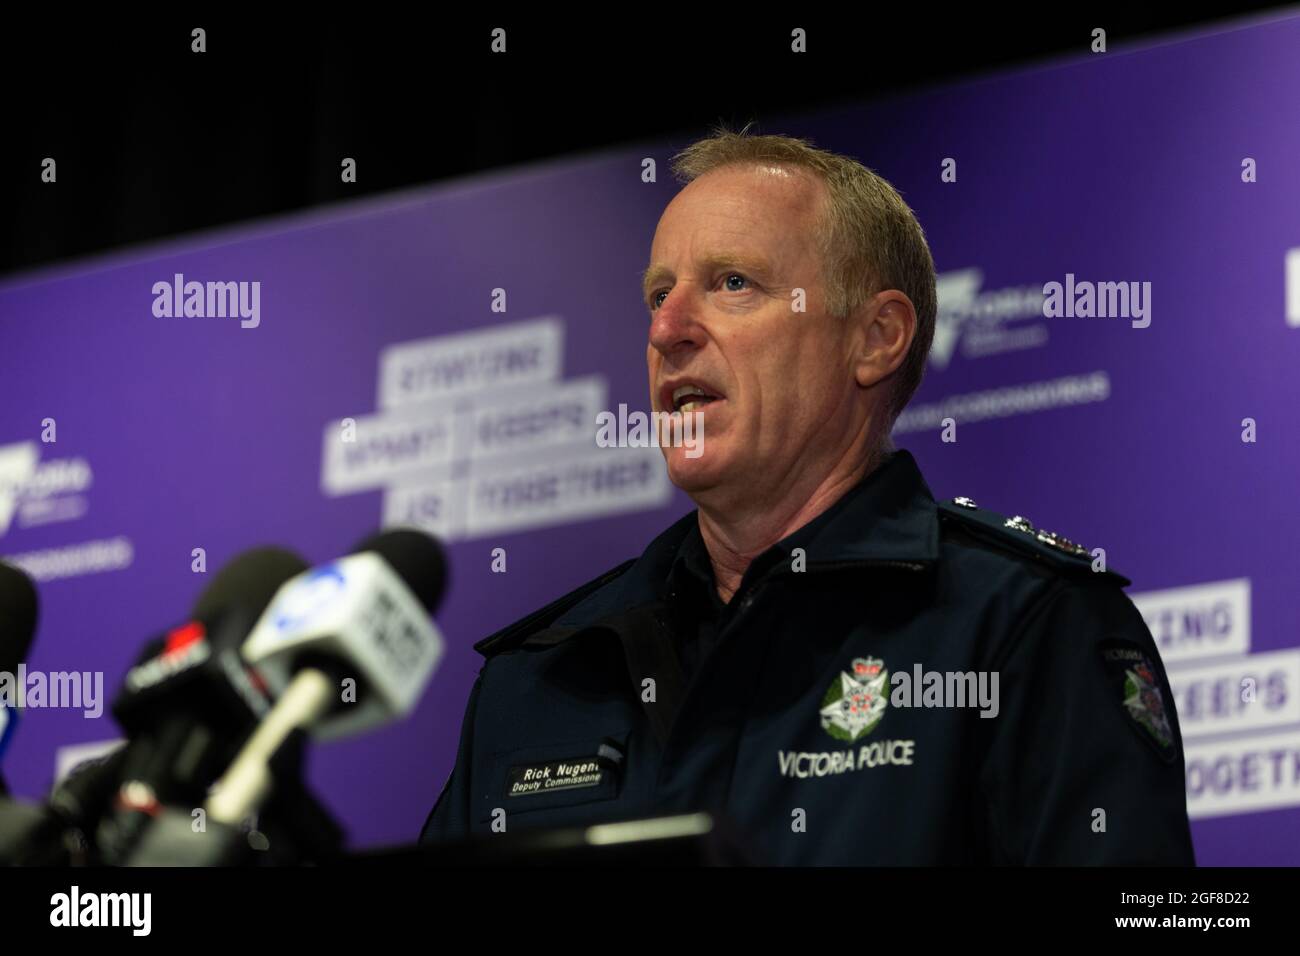 Melbourne, Australia, 15 July, 2020. Deputy Commissioner Rick Nugent speaks to the media during COVID 19 on 15 July, 2020 in Melbourne, Australia. A further 238 COVID-19 cases have been discovered overnight, bringing Victoria’s active cases to over 2000, speculation is rising that almost all of Victoria’s current cases stem from the Andrews Government botched hotel quarantine scheme as well as the Black Lives Matter protest.  Premier Daniel Andrews warns that Victoria may go to Stage 4 lockdown if these high numbers continue. Credit: Dave Hewison/Speed Media/Alamy Live News Stock Photo